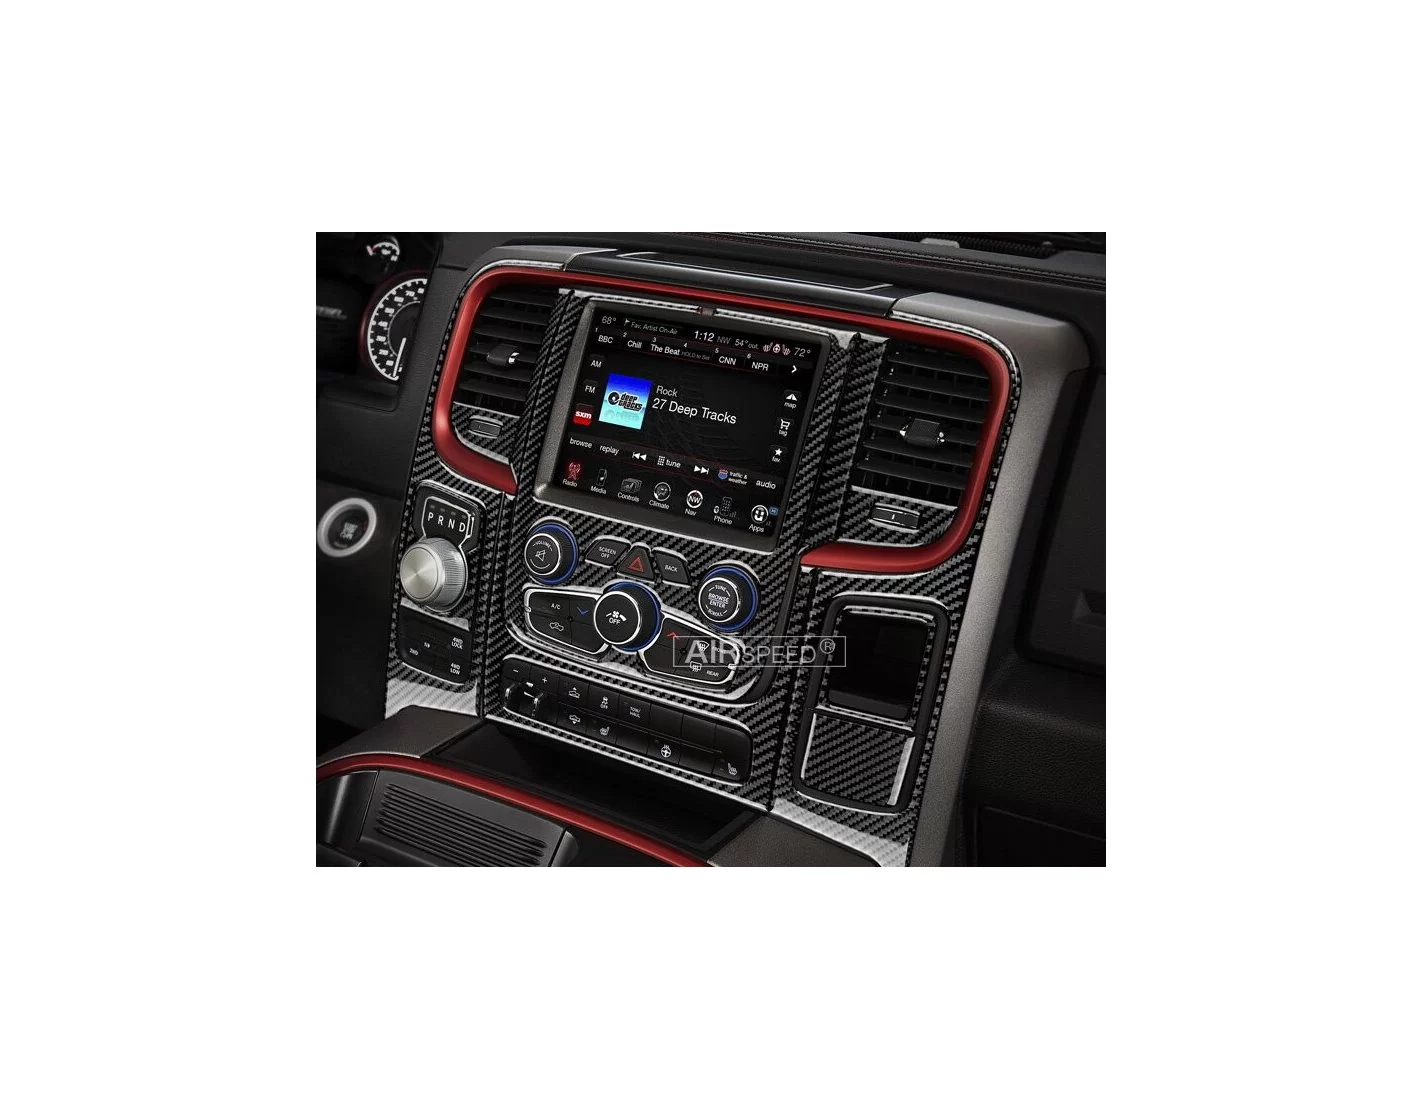 Dodge Ram 2016-2018 full interior dash trim kit With Touch Screen Display, With Front Bucket Seats, 65 Pcs.